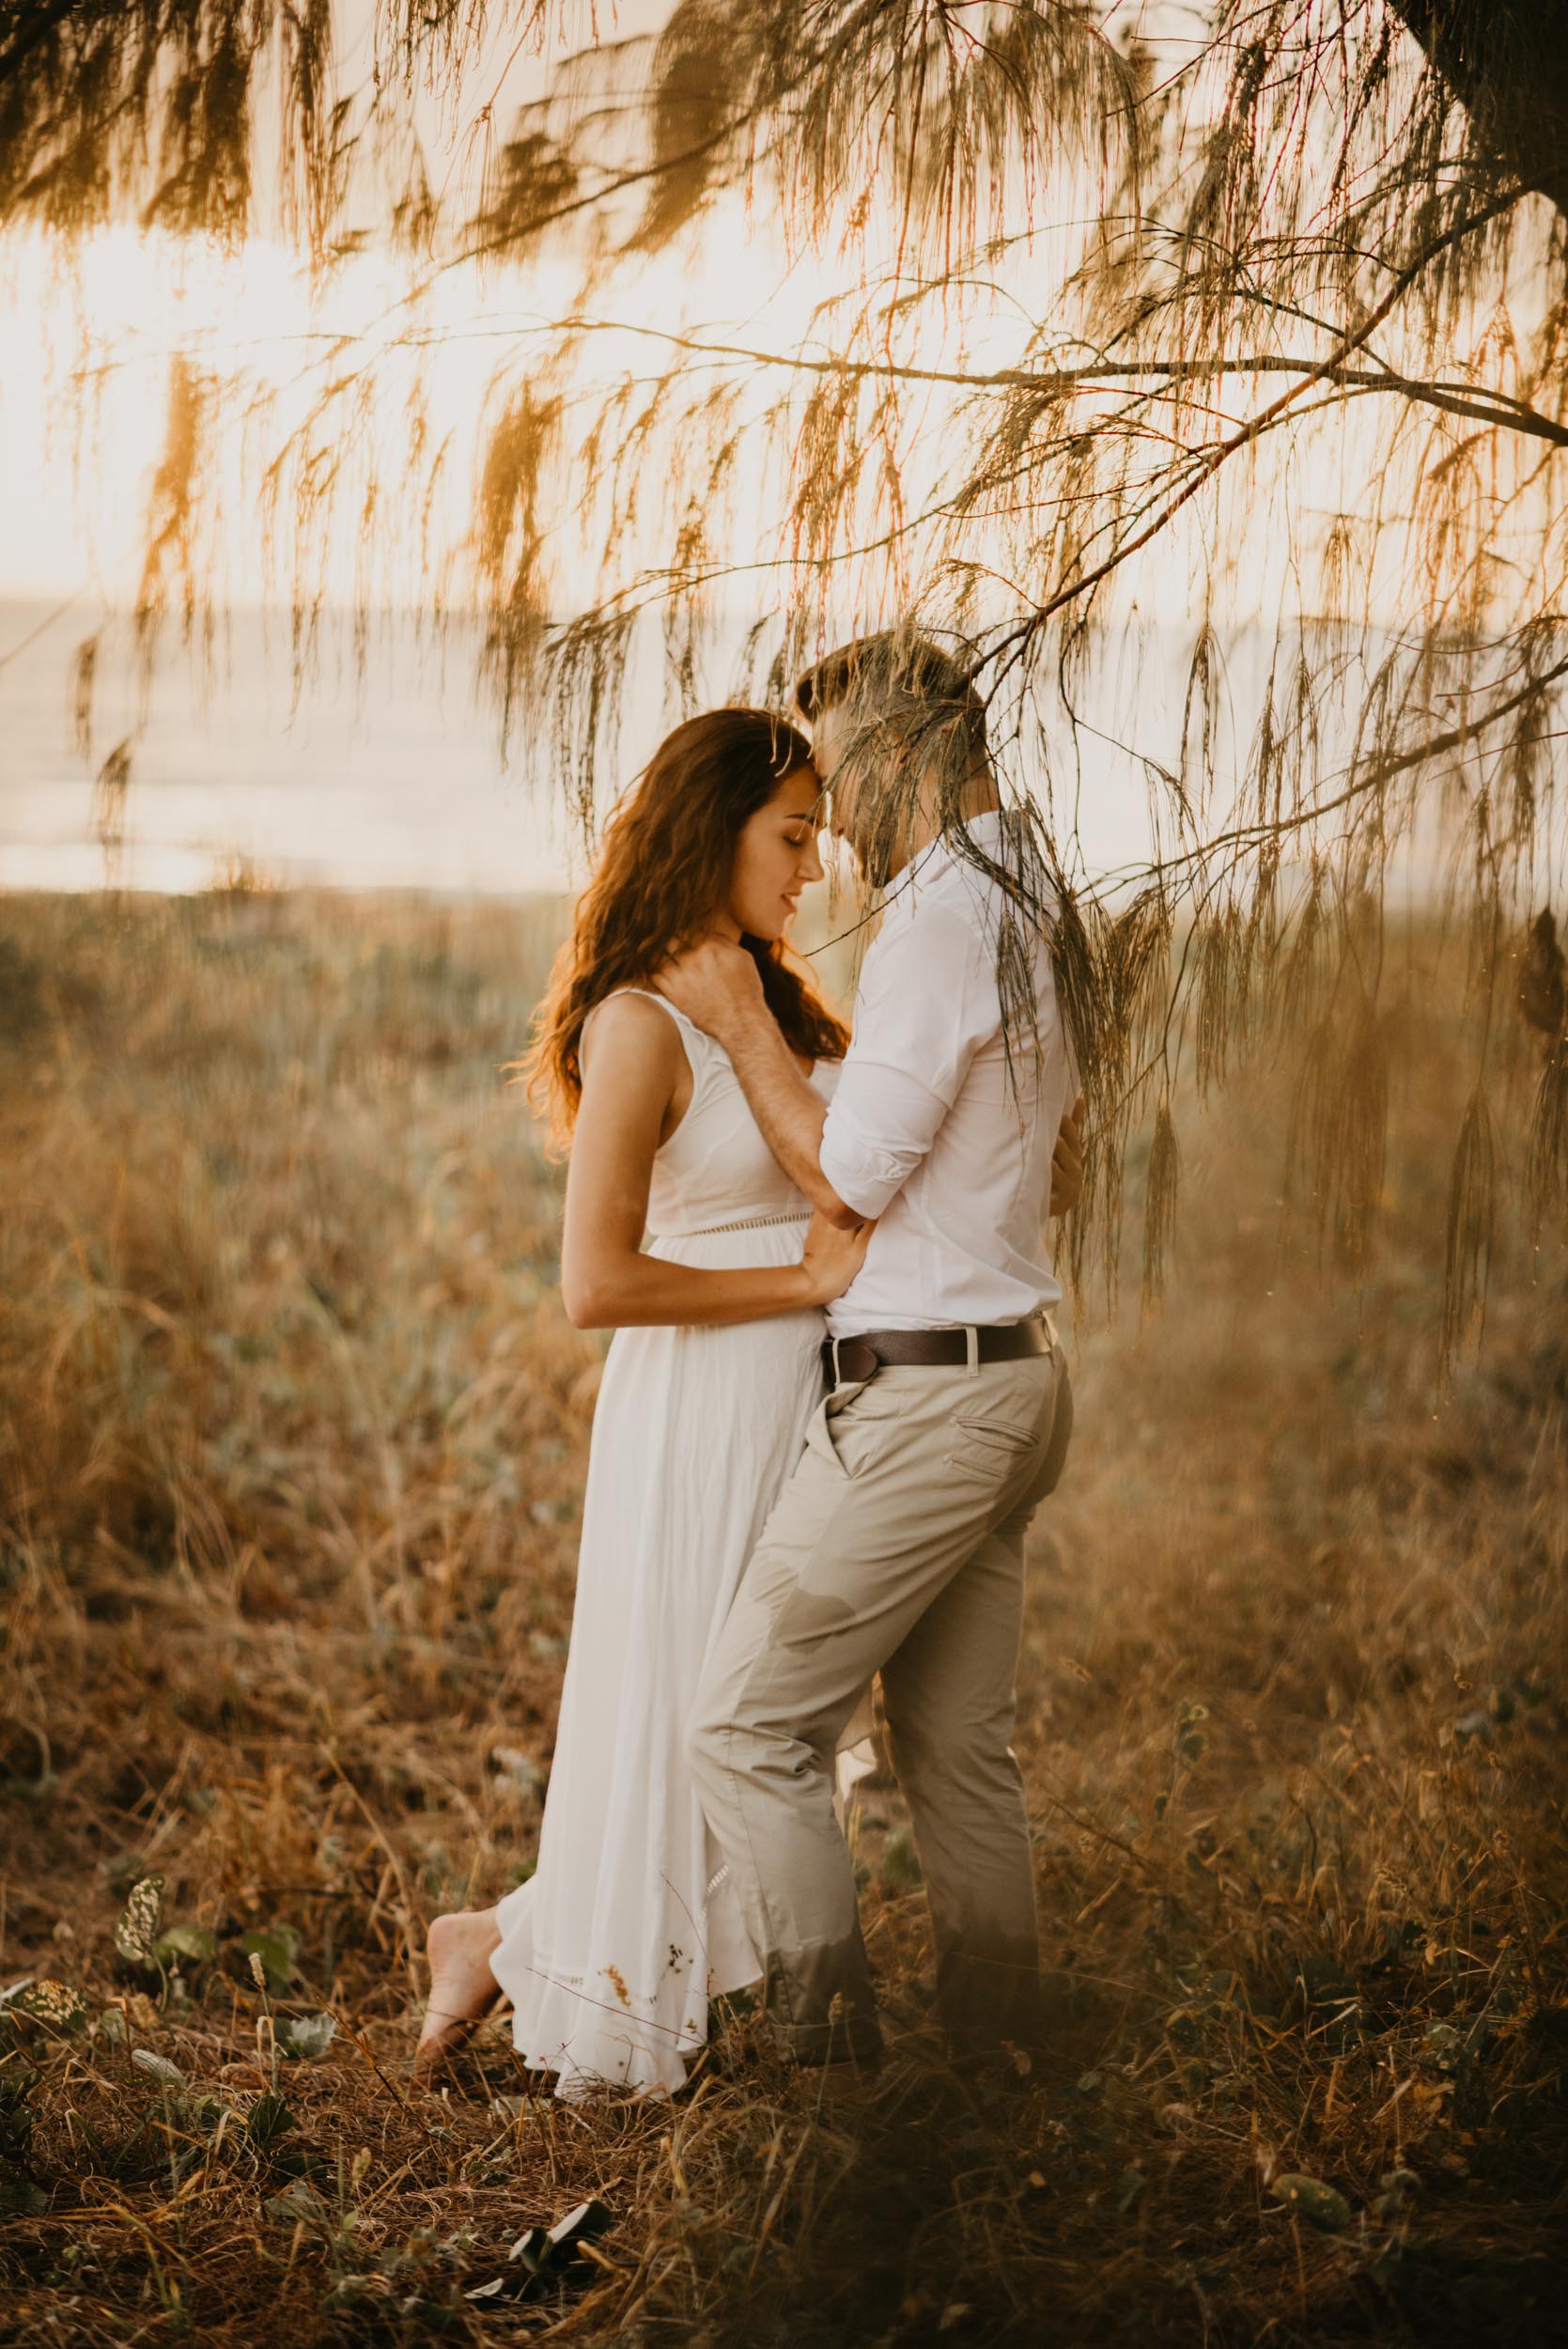 The Raw Photographer - Cairns Wedding Photographer - Engaged Engagement - Beach location - Candid Photography Queensland-22.jpg